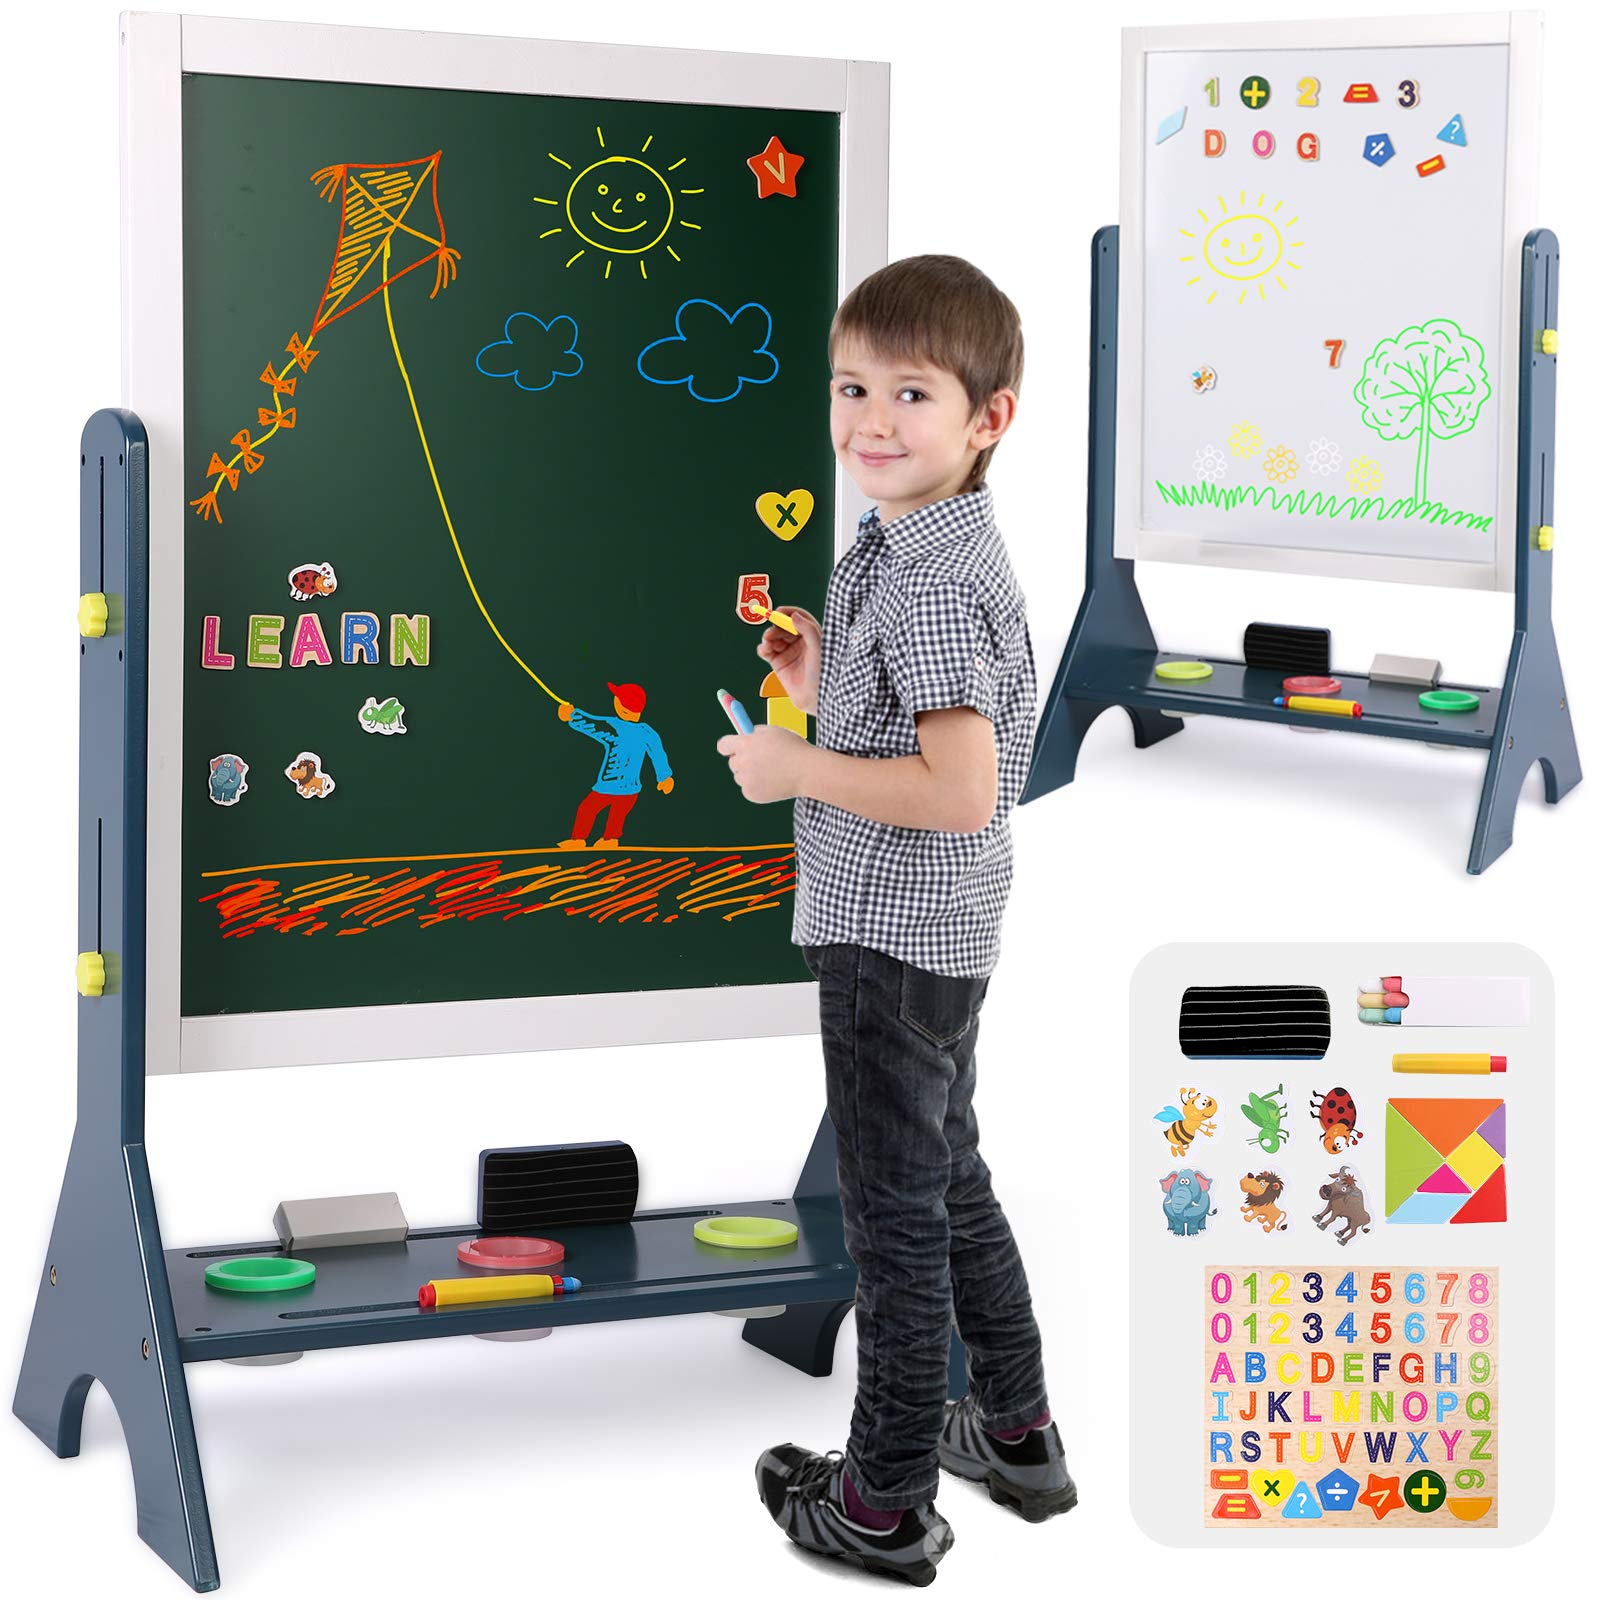 Kids 2-in-1 Wooden Art Easel,Double-Sided Magnetic Adjustable Standing Easel,Big Writing and Drawing Whiteboard & Chalkboard with Magnetic Letters and Numbers Accessories for Boys Girls Featured Image